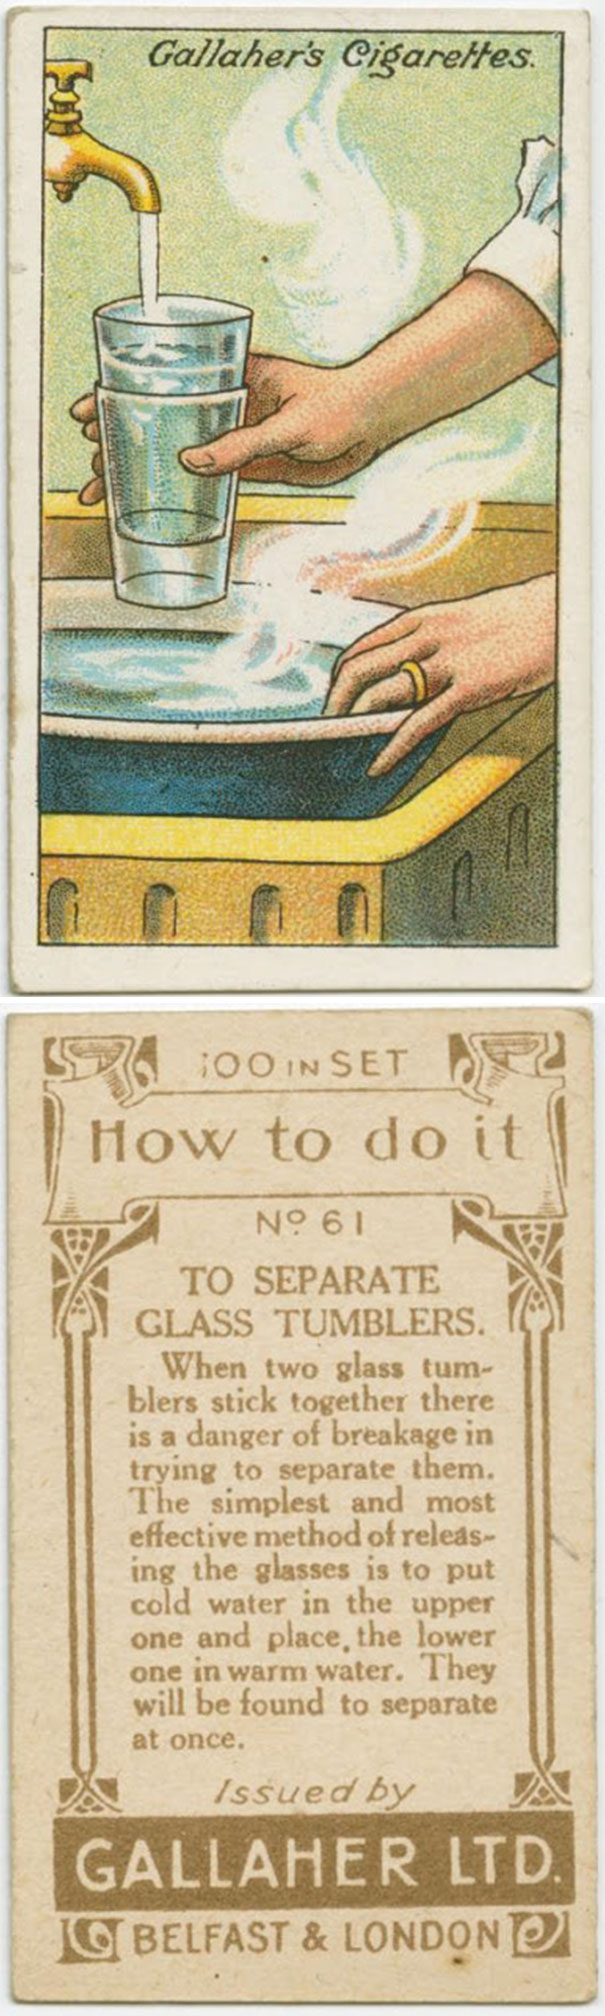 vintage-life-hacks-from-the-1900s-65